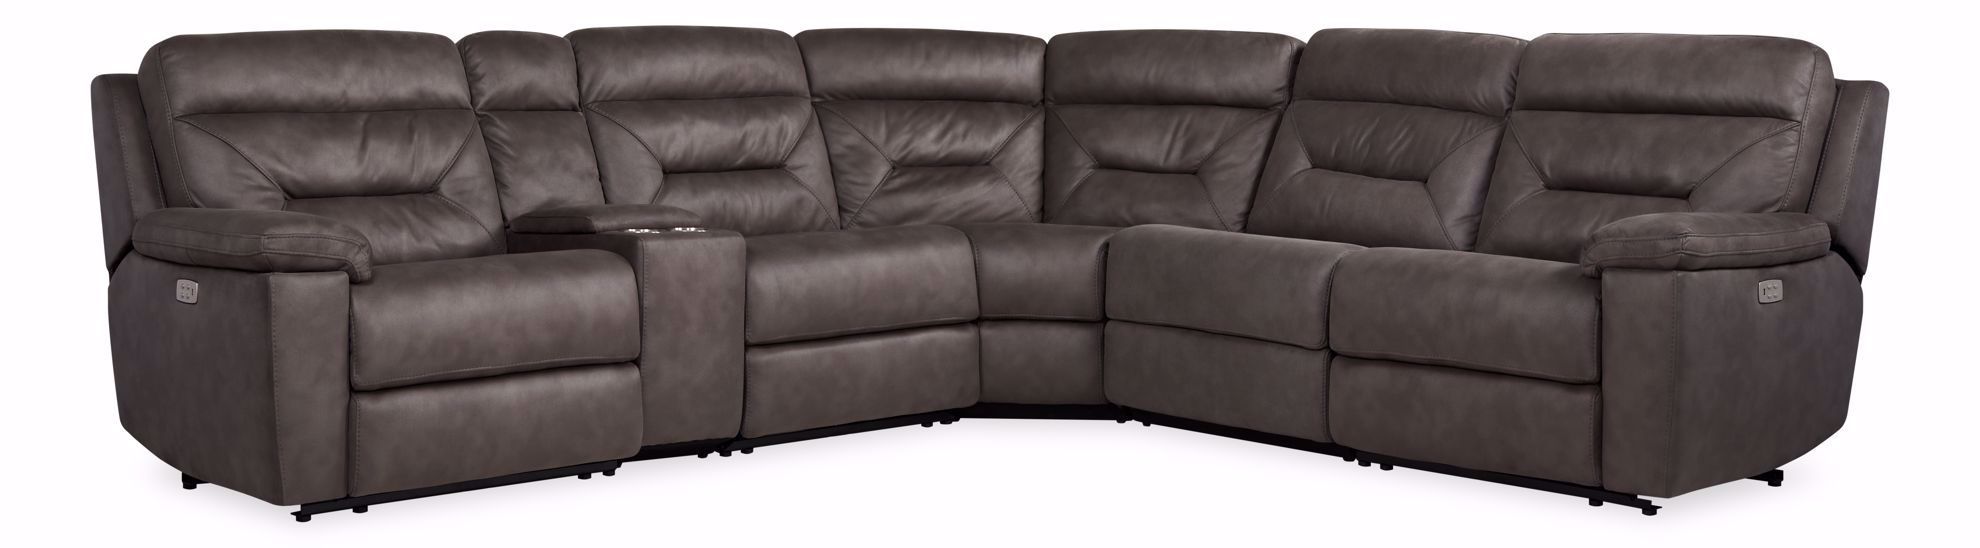 Lissom 6pc Power Reclining Sectional